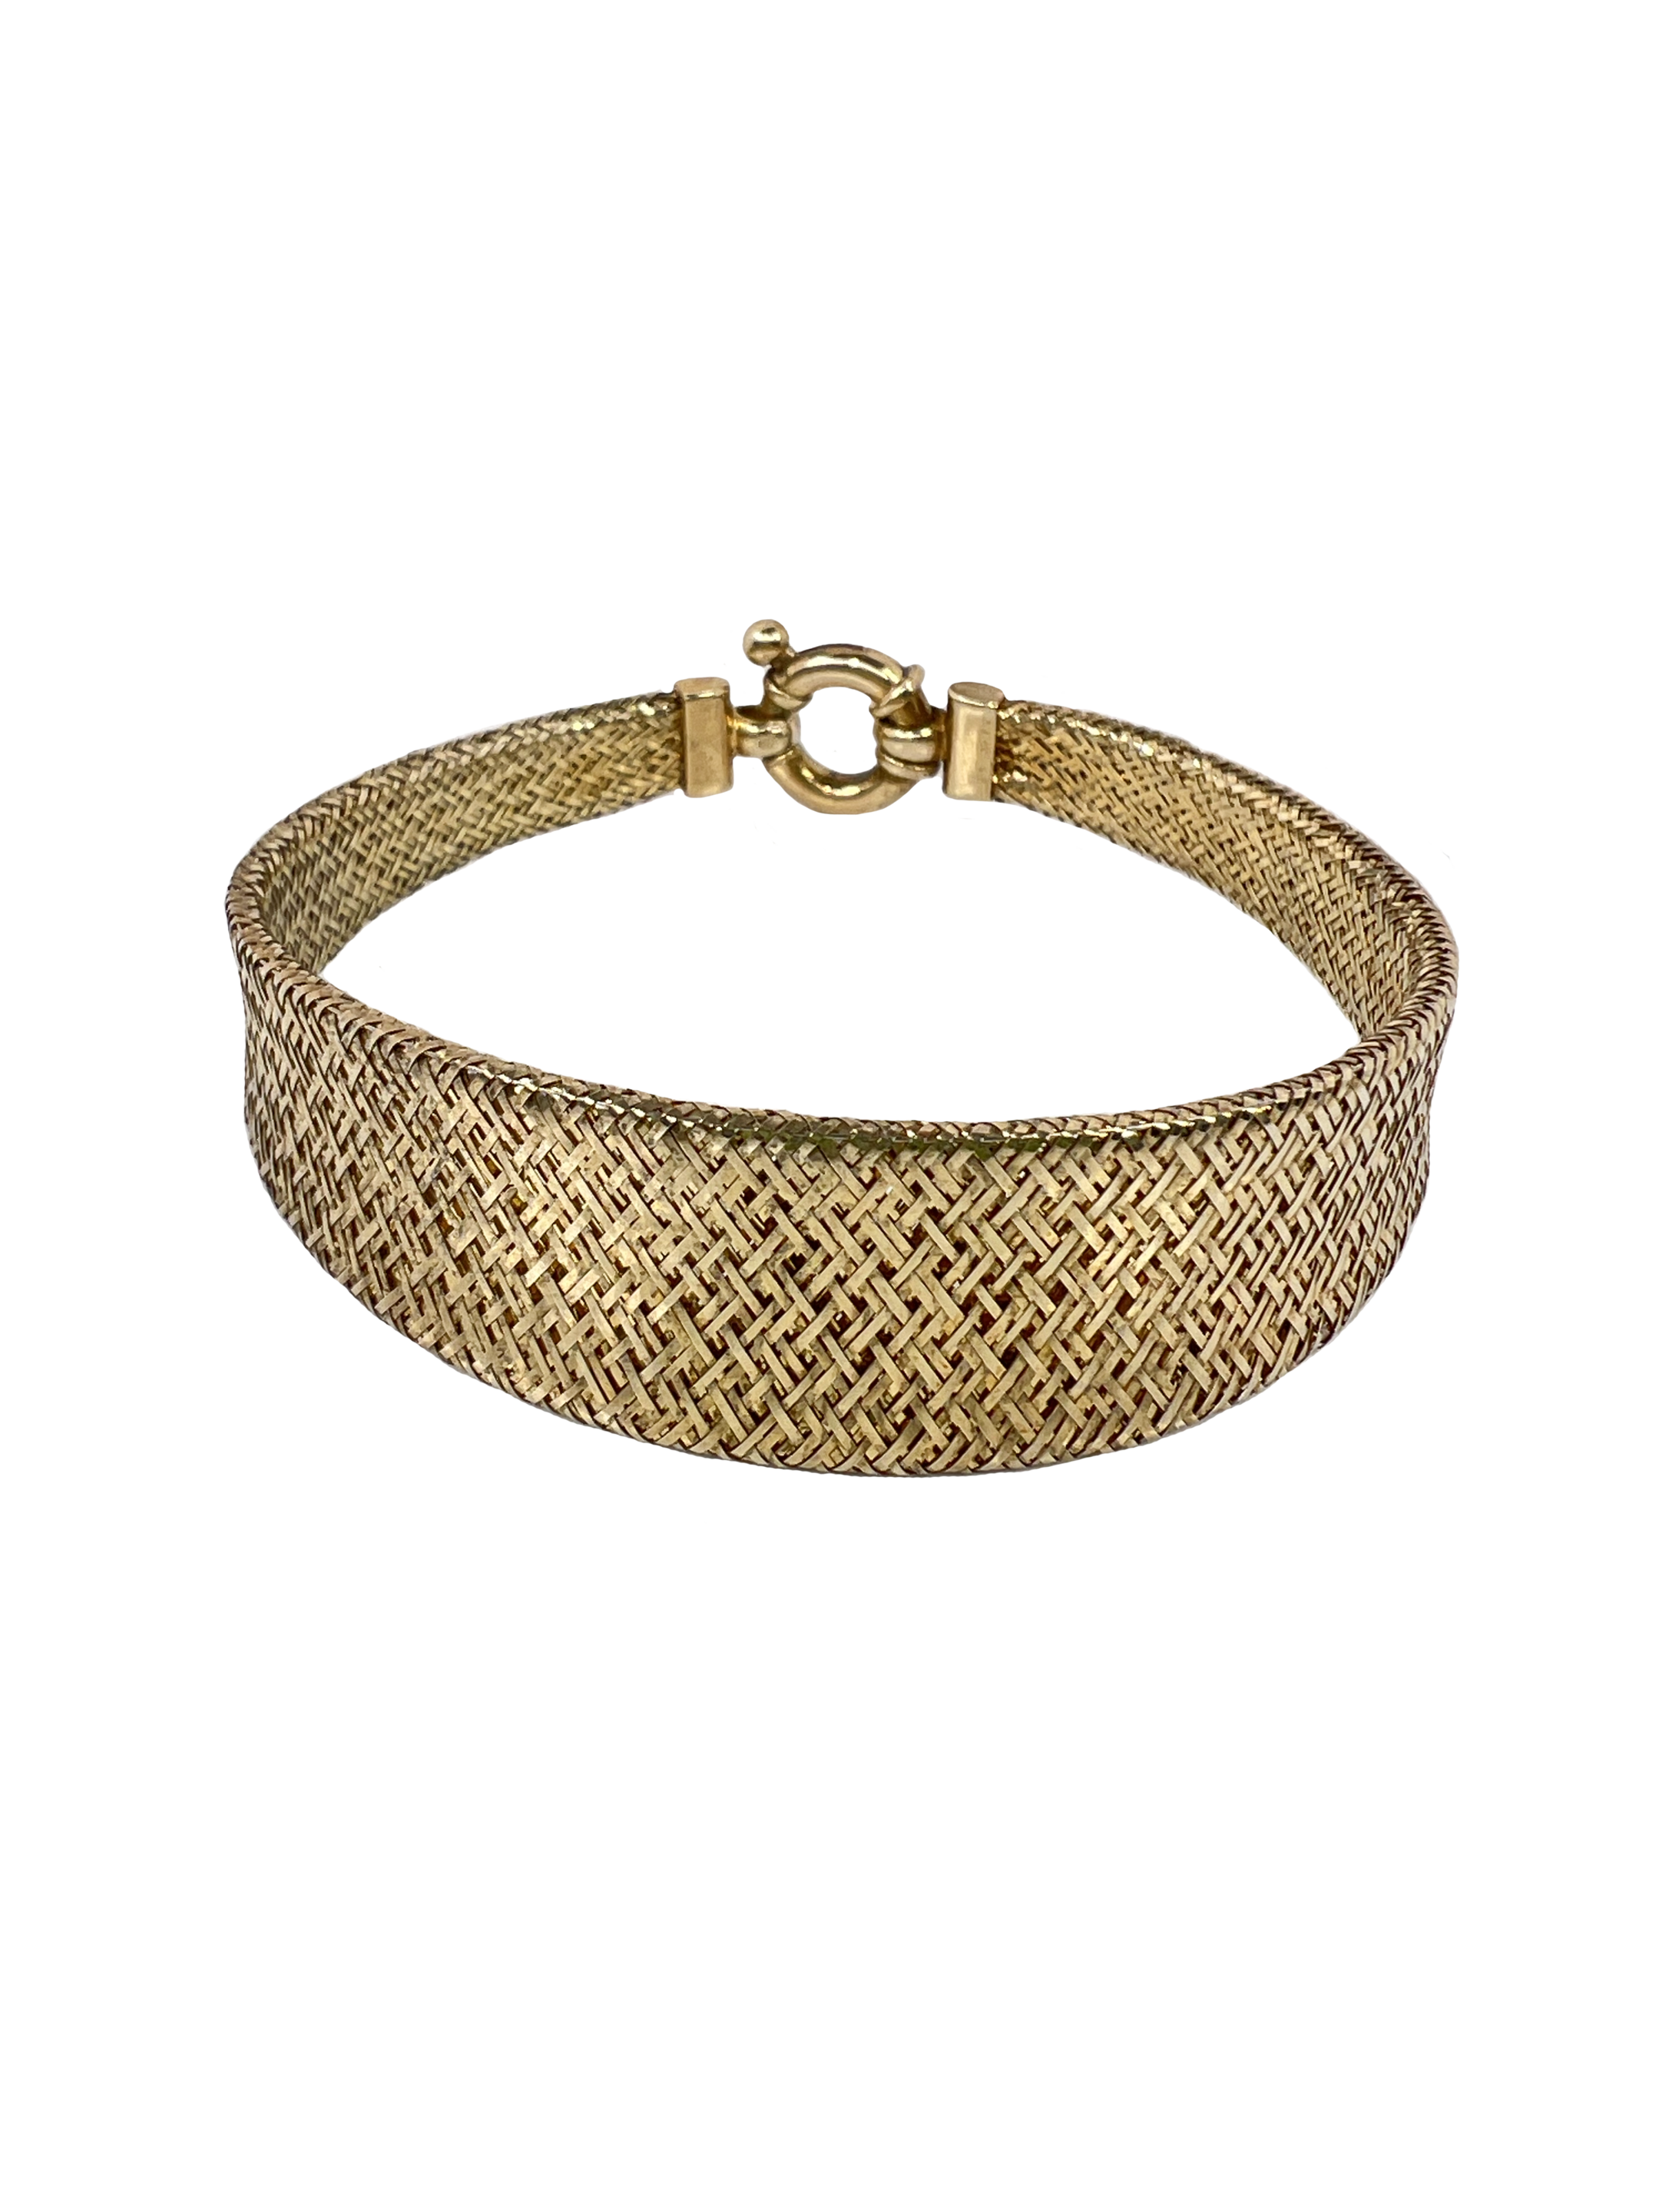 Silver bracelet braided pattern with surface treatment